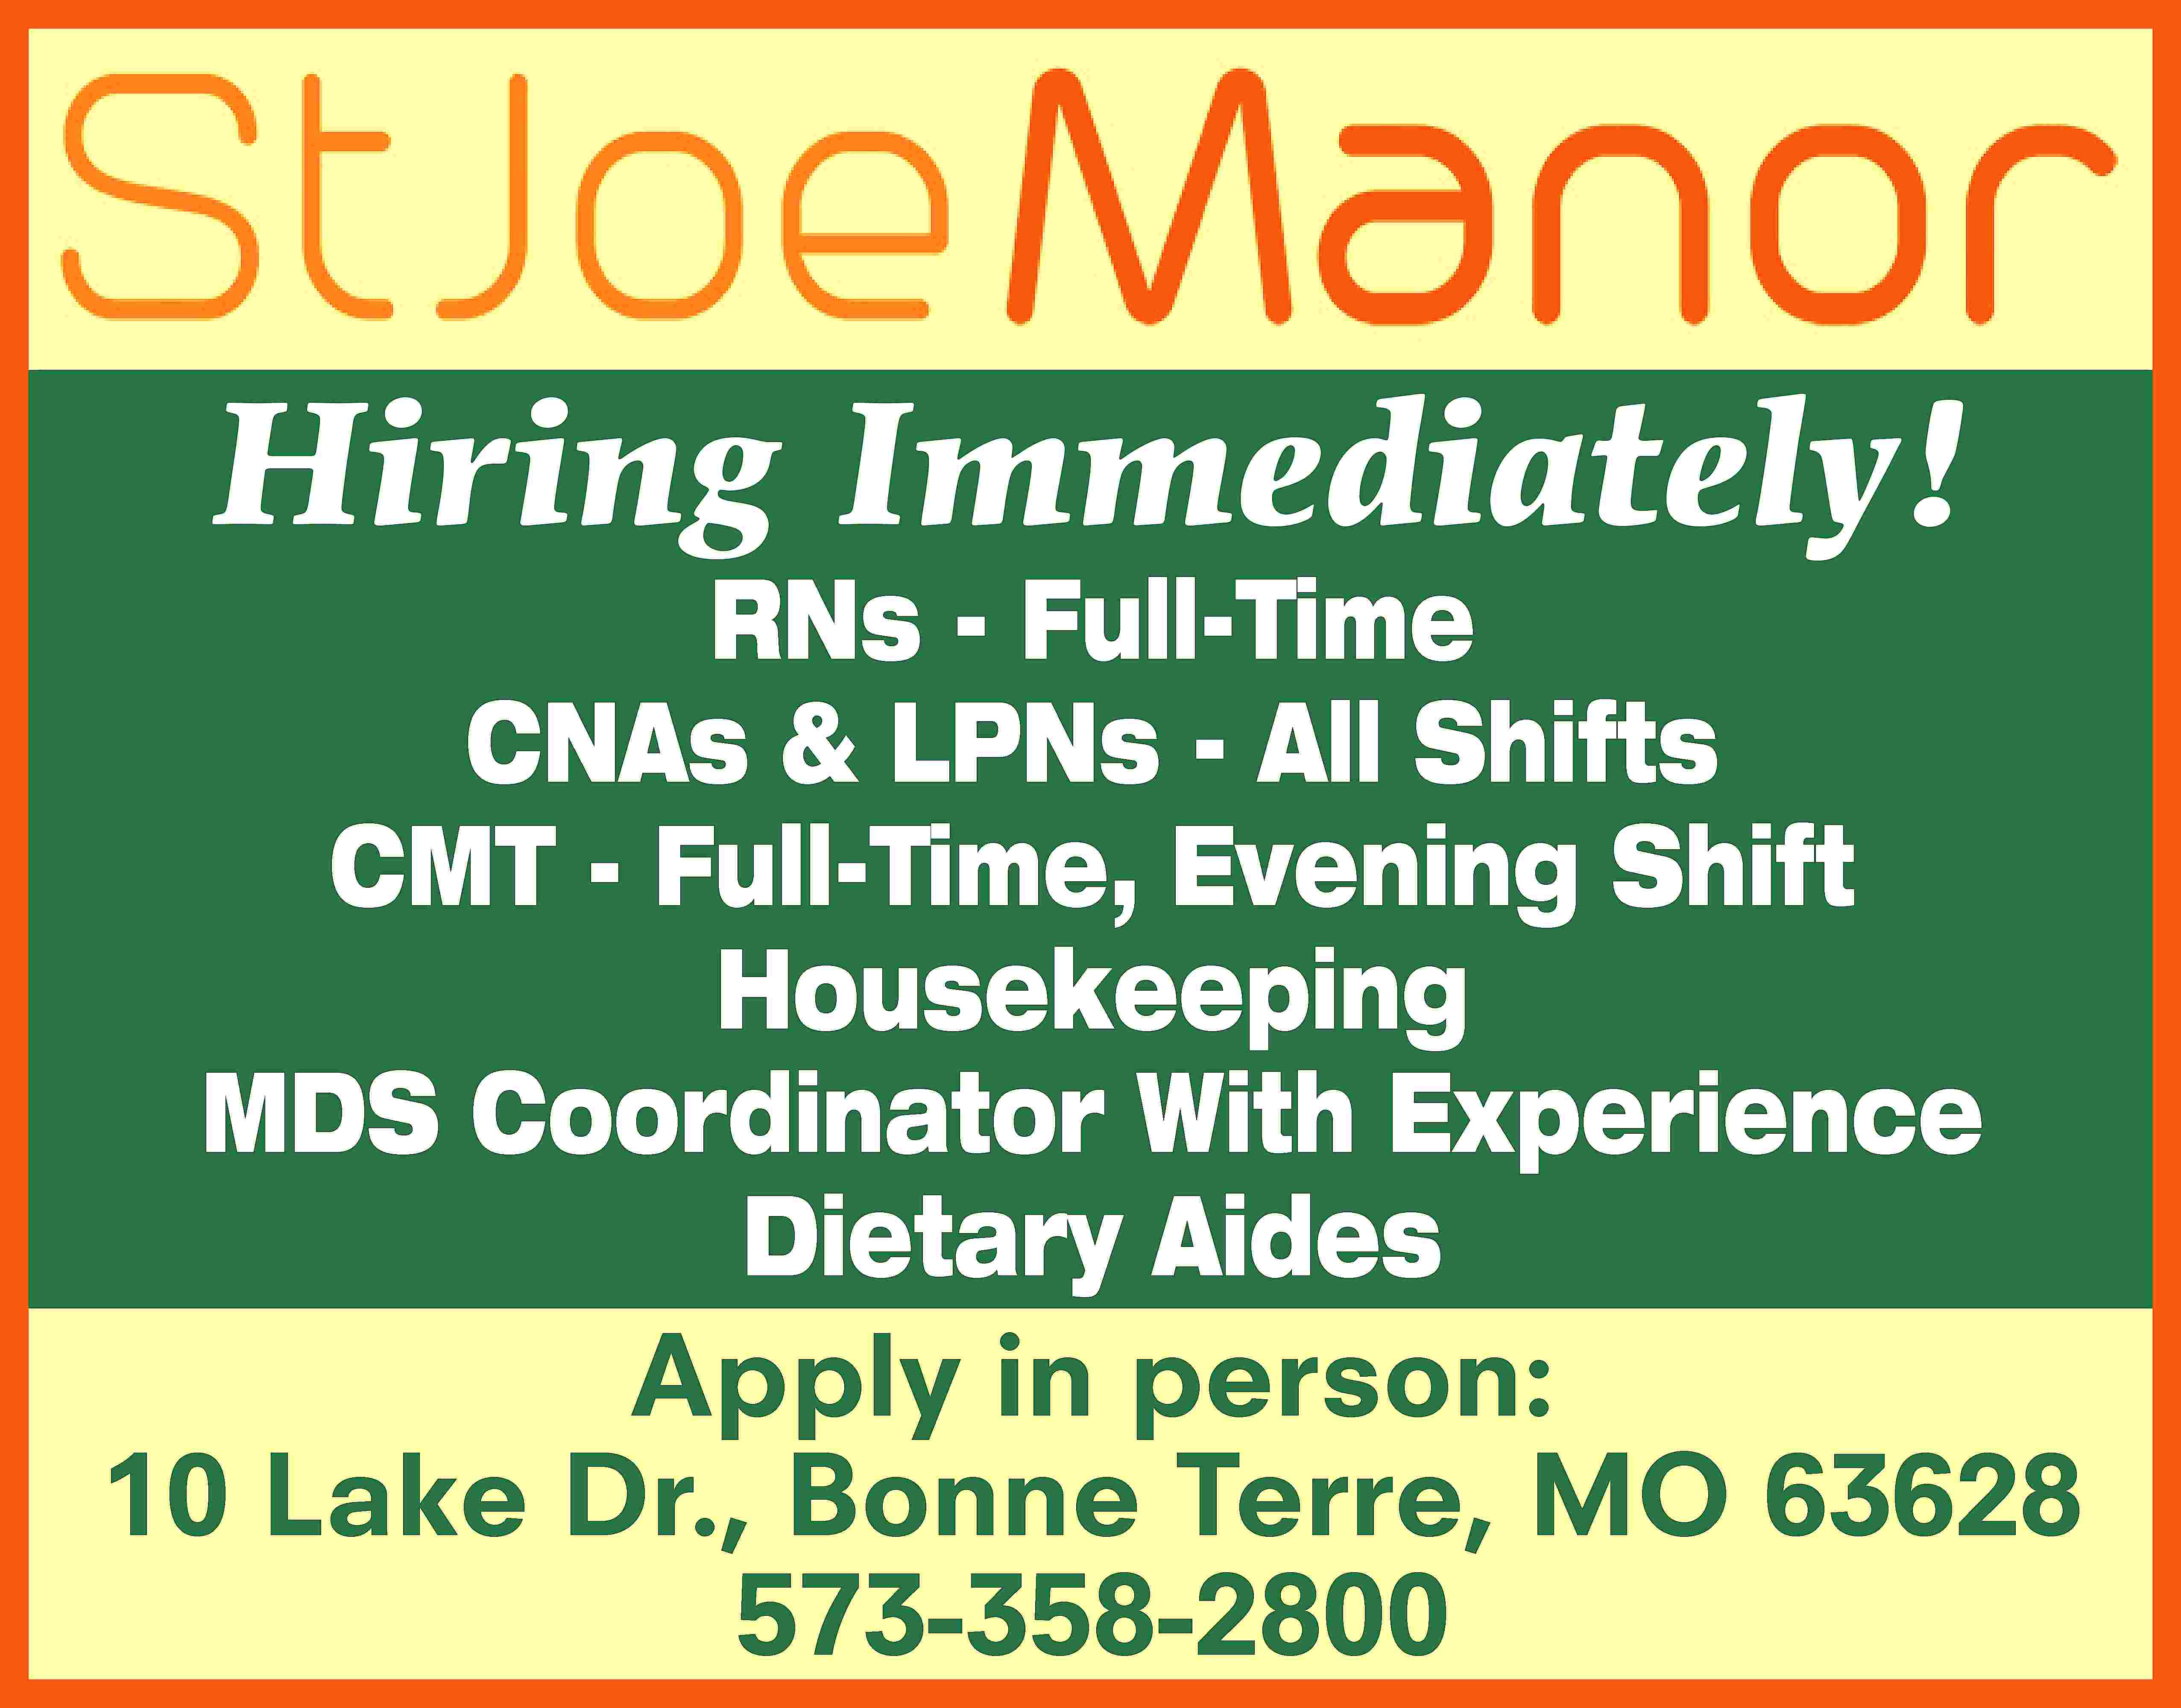 Hiring Immediately! RNs - Full-Time  Hiring Immediately! RNs - Full-Time CNAs & LPNs - All Shifts CMT - Full-Time, Evening Shift Housekeeping MDS Coordinator With Experience Dietary Aides Apply in person: 10 Lake Dr., Bonne Terre, MO 63628 573-358-2800